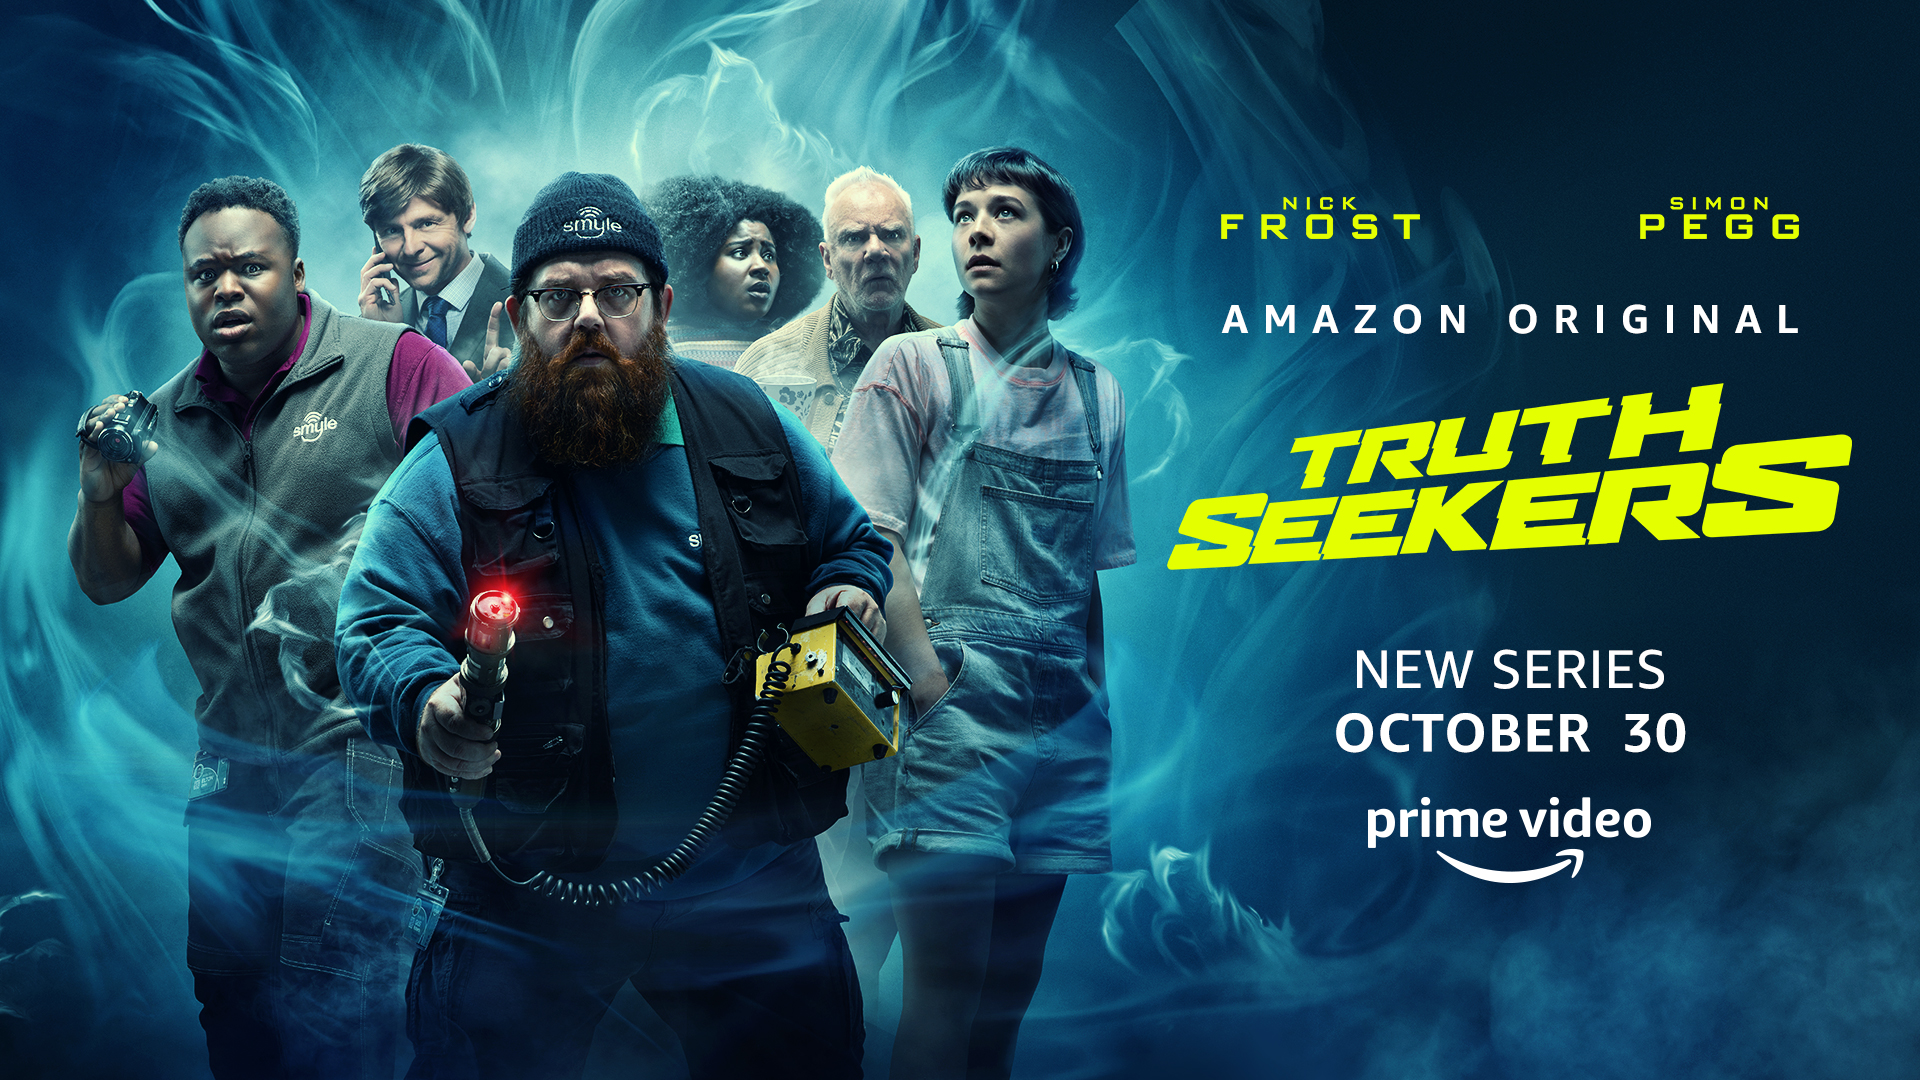 Simon Pegg And Nick Frost Take On The Paranormal In Amazon’s Truth Seekers